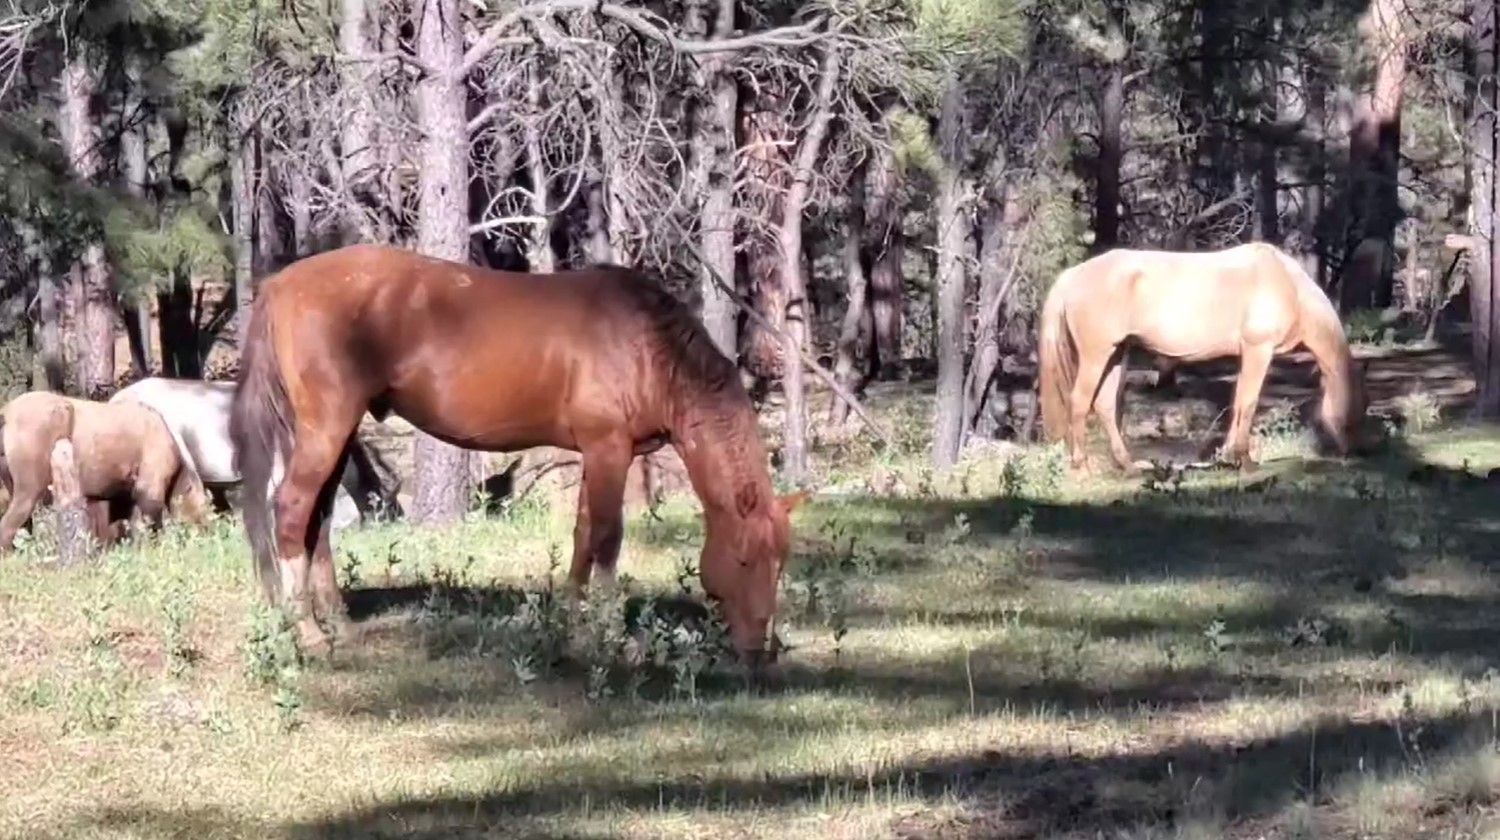 Apache Sitgreaves Forest Service starts trapping the Alpine herd this week, in spite of horse advocates push for humane management.